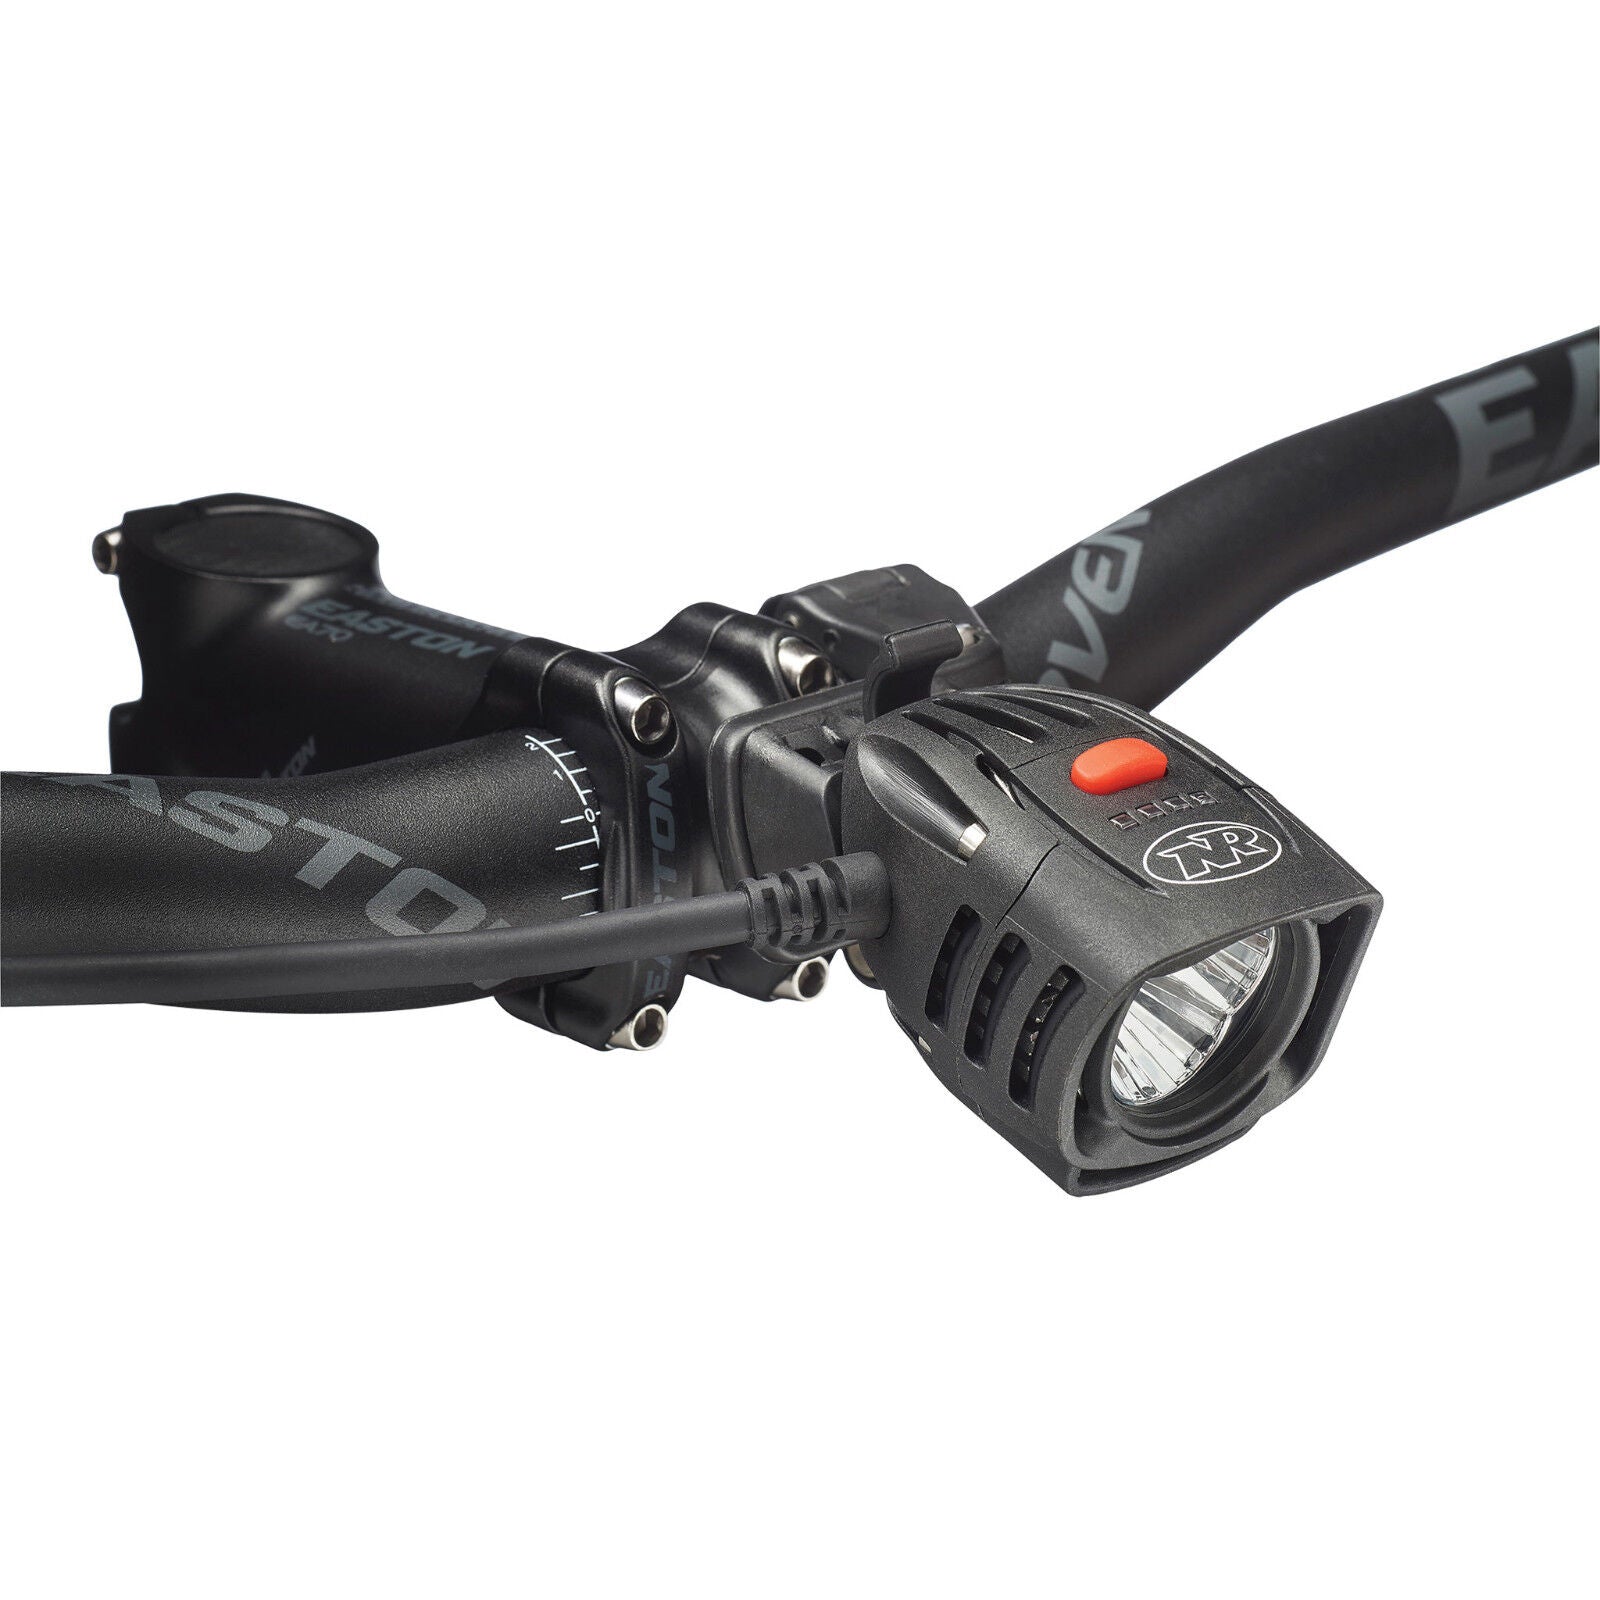 NiteRider Pro 2200 Enduro 8 LED Headlight with 8 Cell Battery